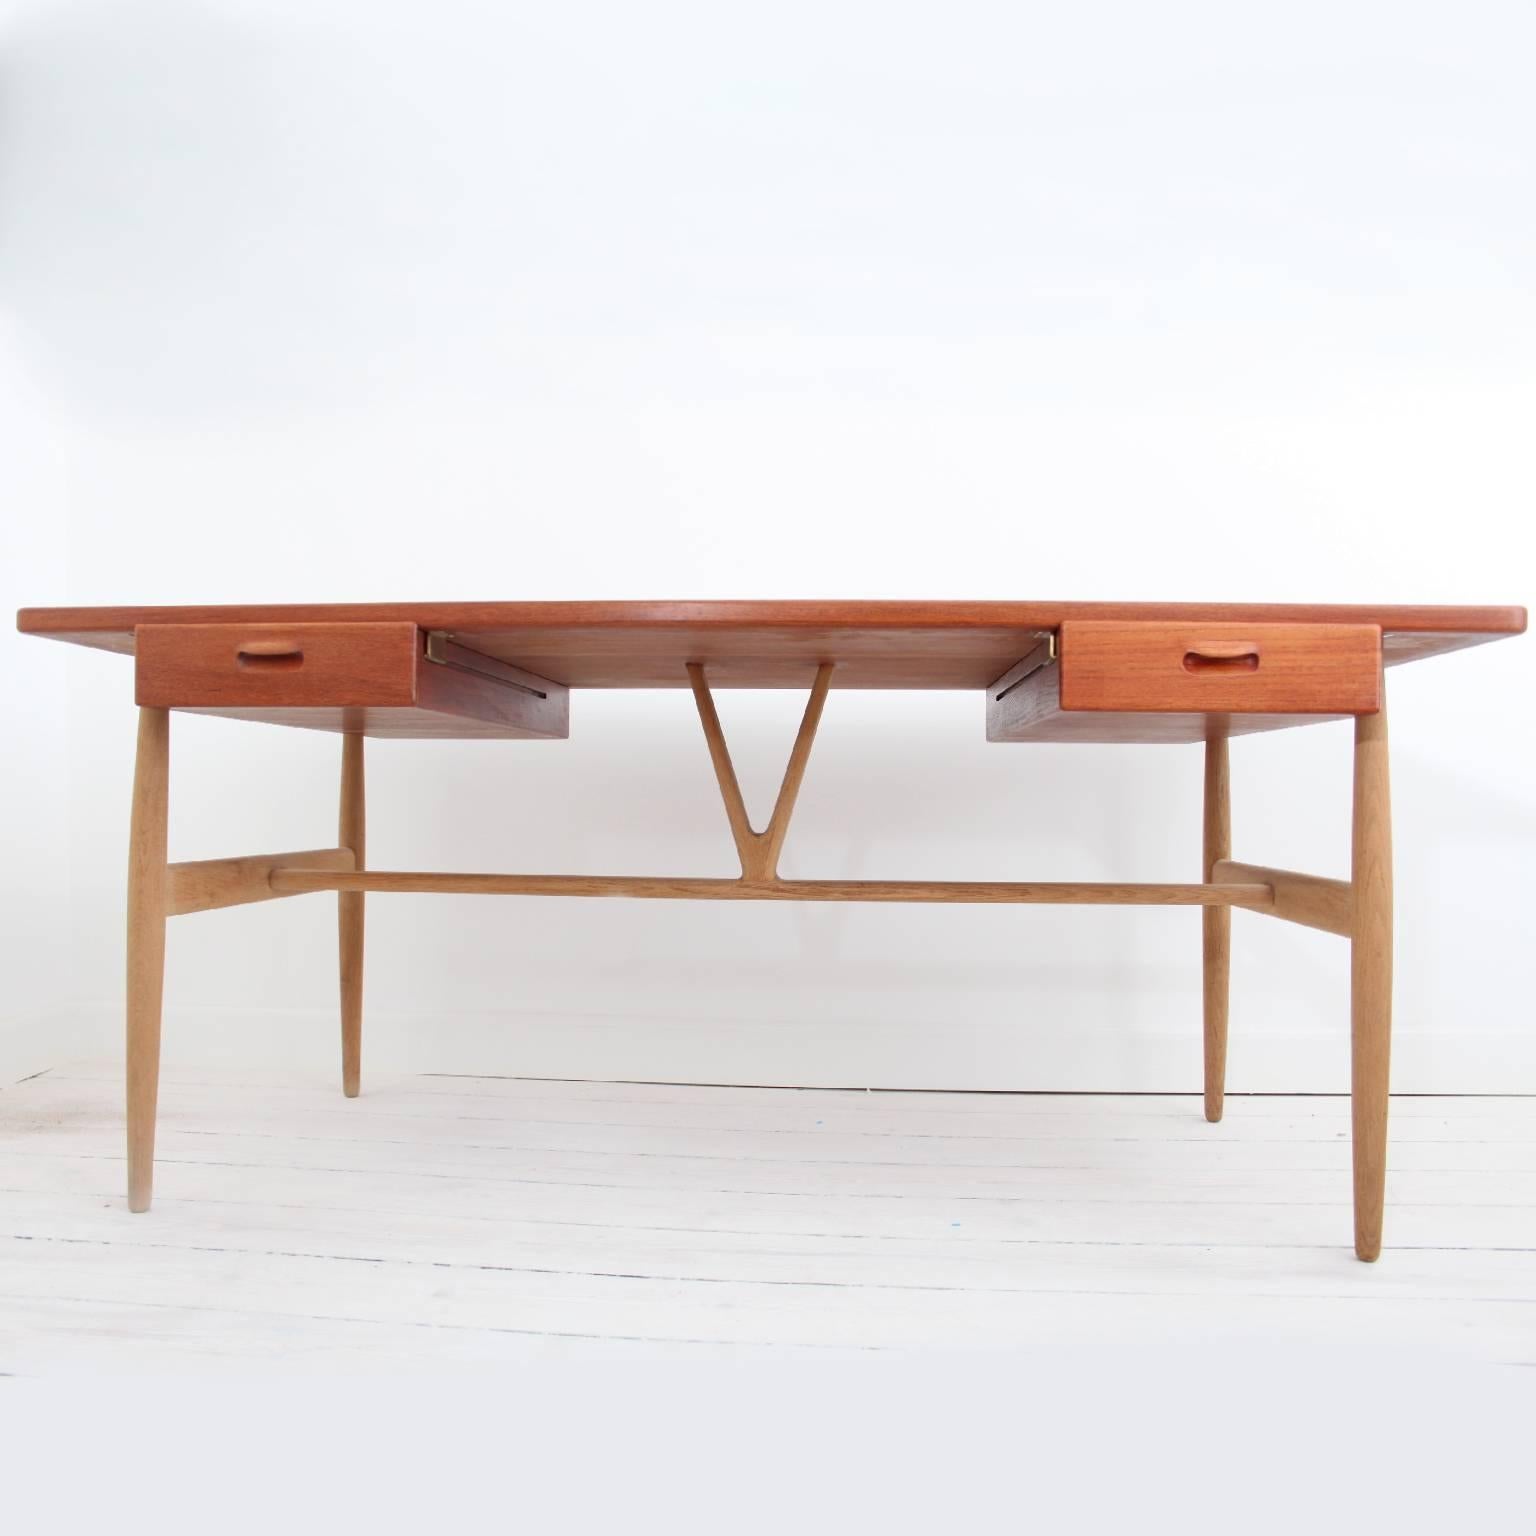 A rare JH563 / V' desk designed by Hans J. Wegner, 1950.

A large writing desk of teak with two hand-carved floating drawers on a base of turned oak legs braced by a hand-carved central wishbone-shaped strut. 

Executed by cabinetmaker Johannes